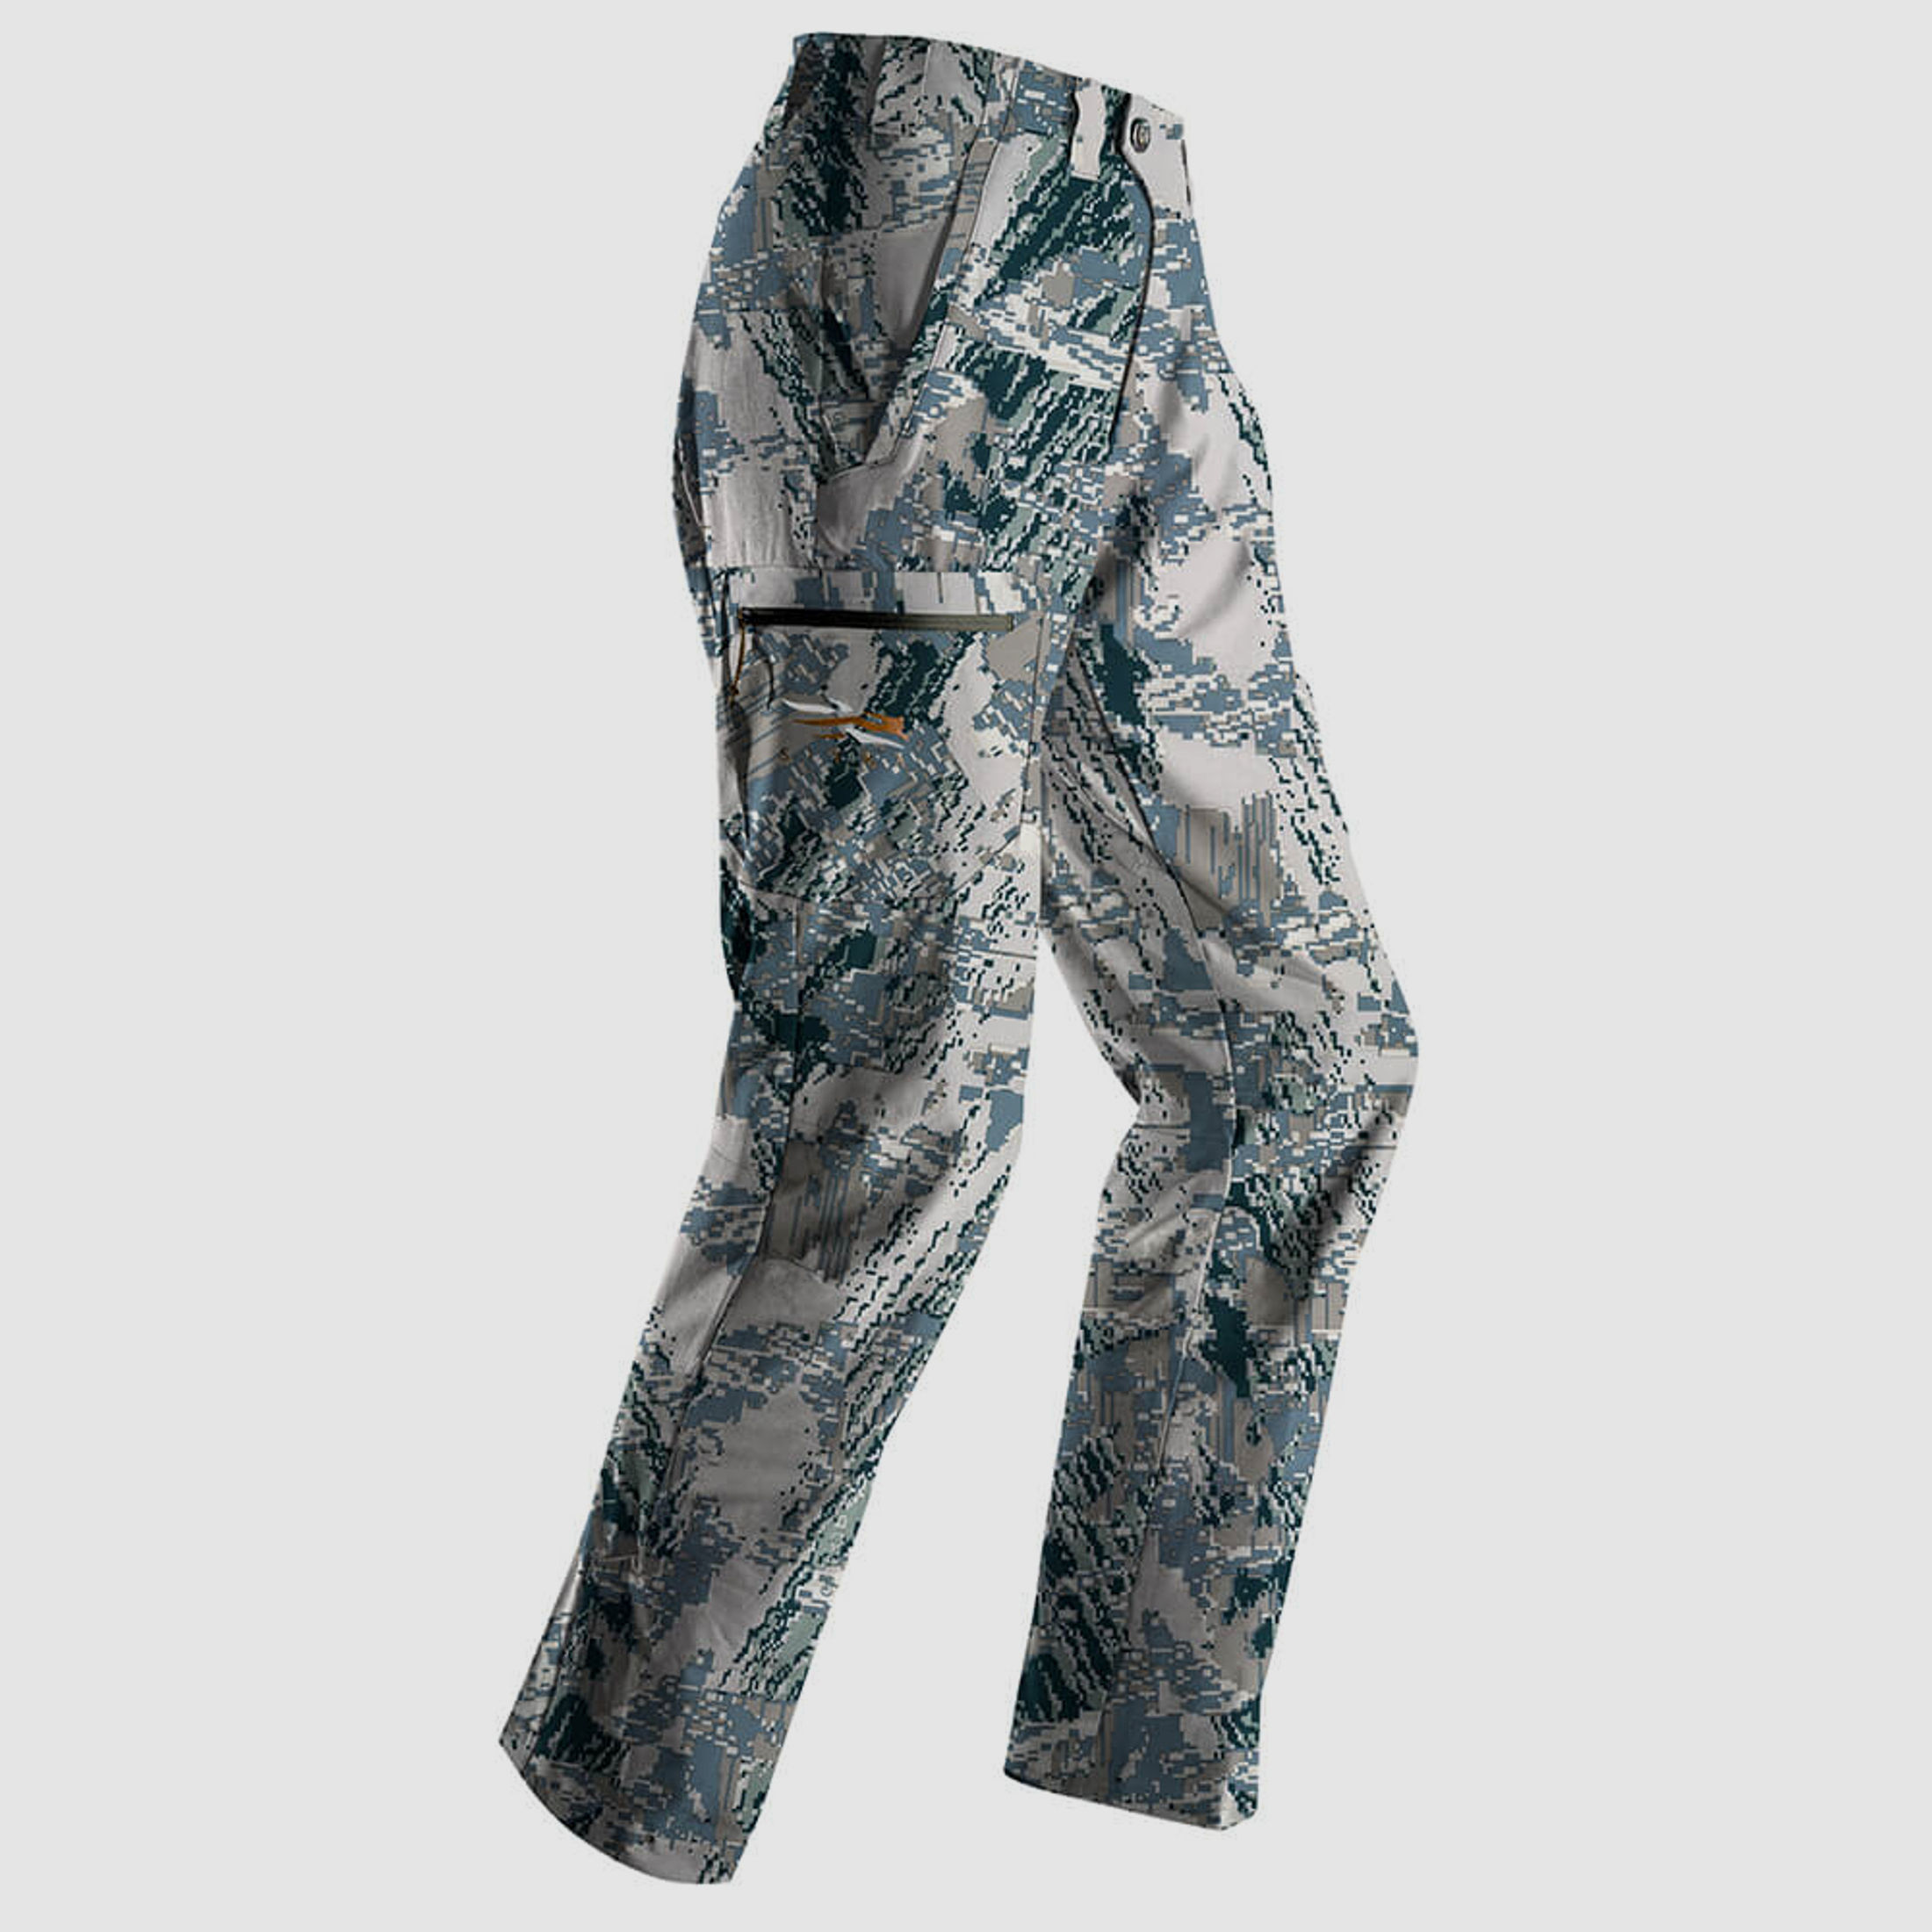 Sitka Gear Jagdhose Ascent (Open Country)